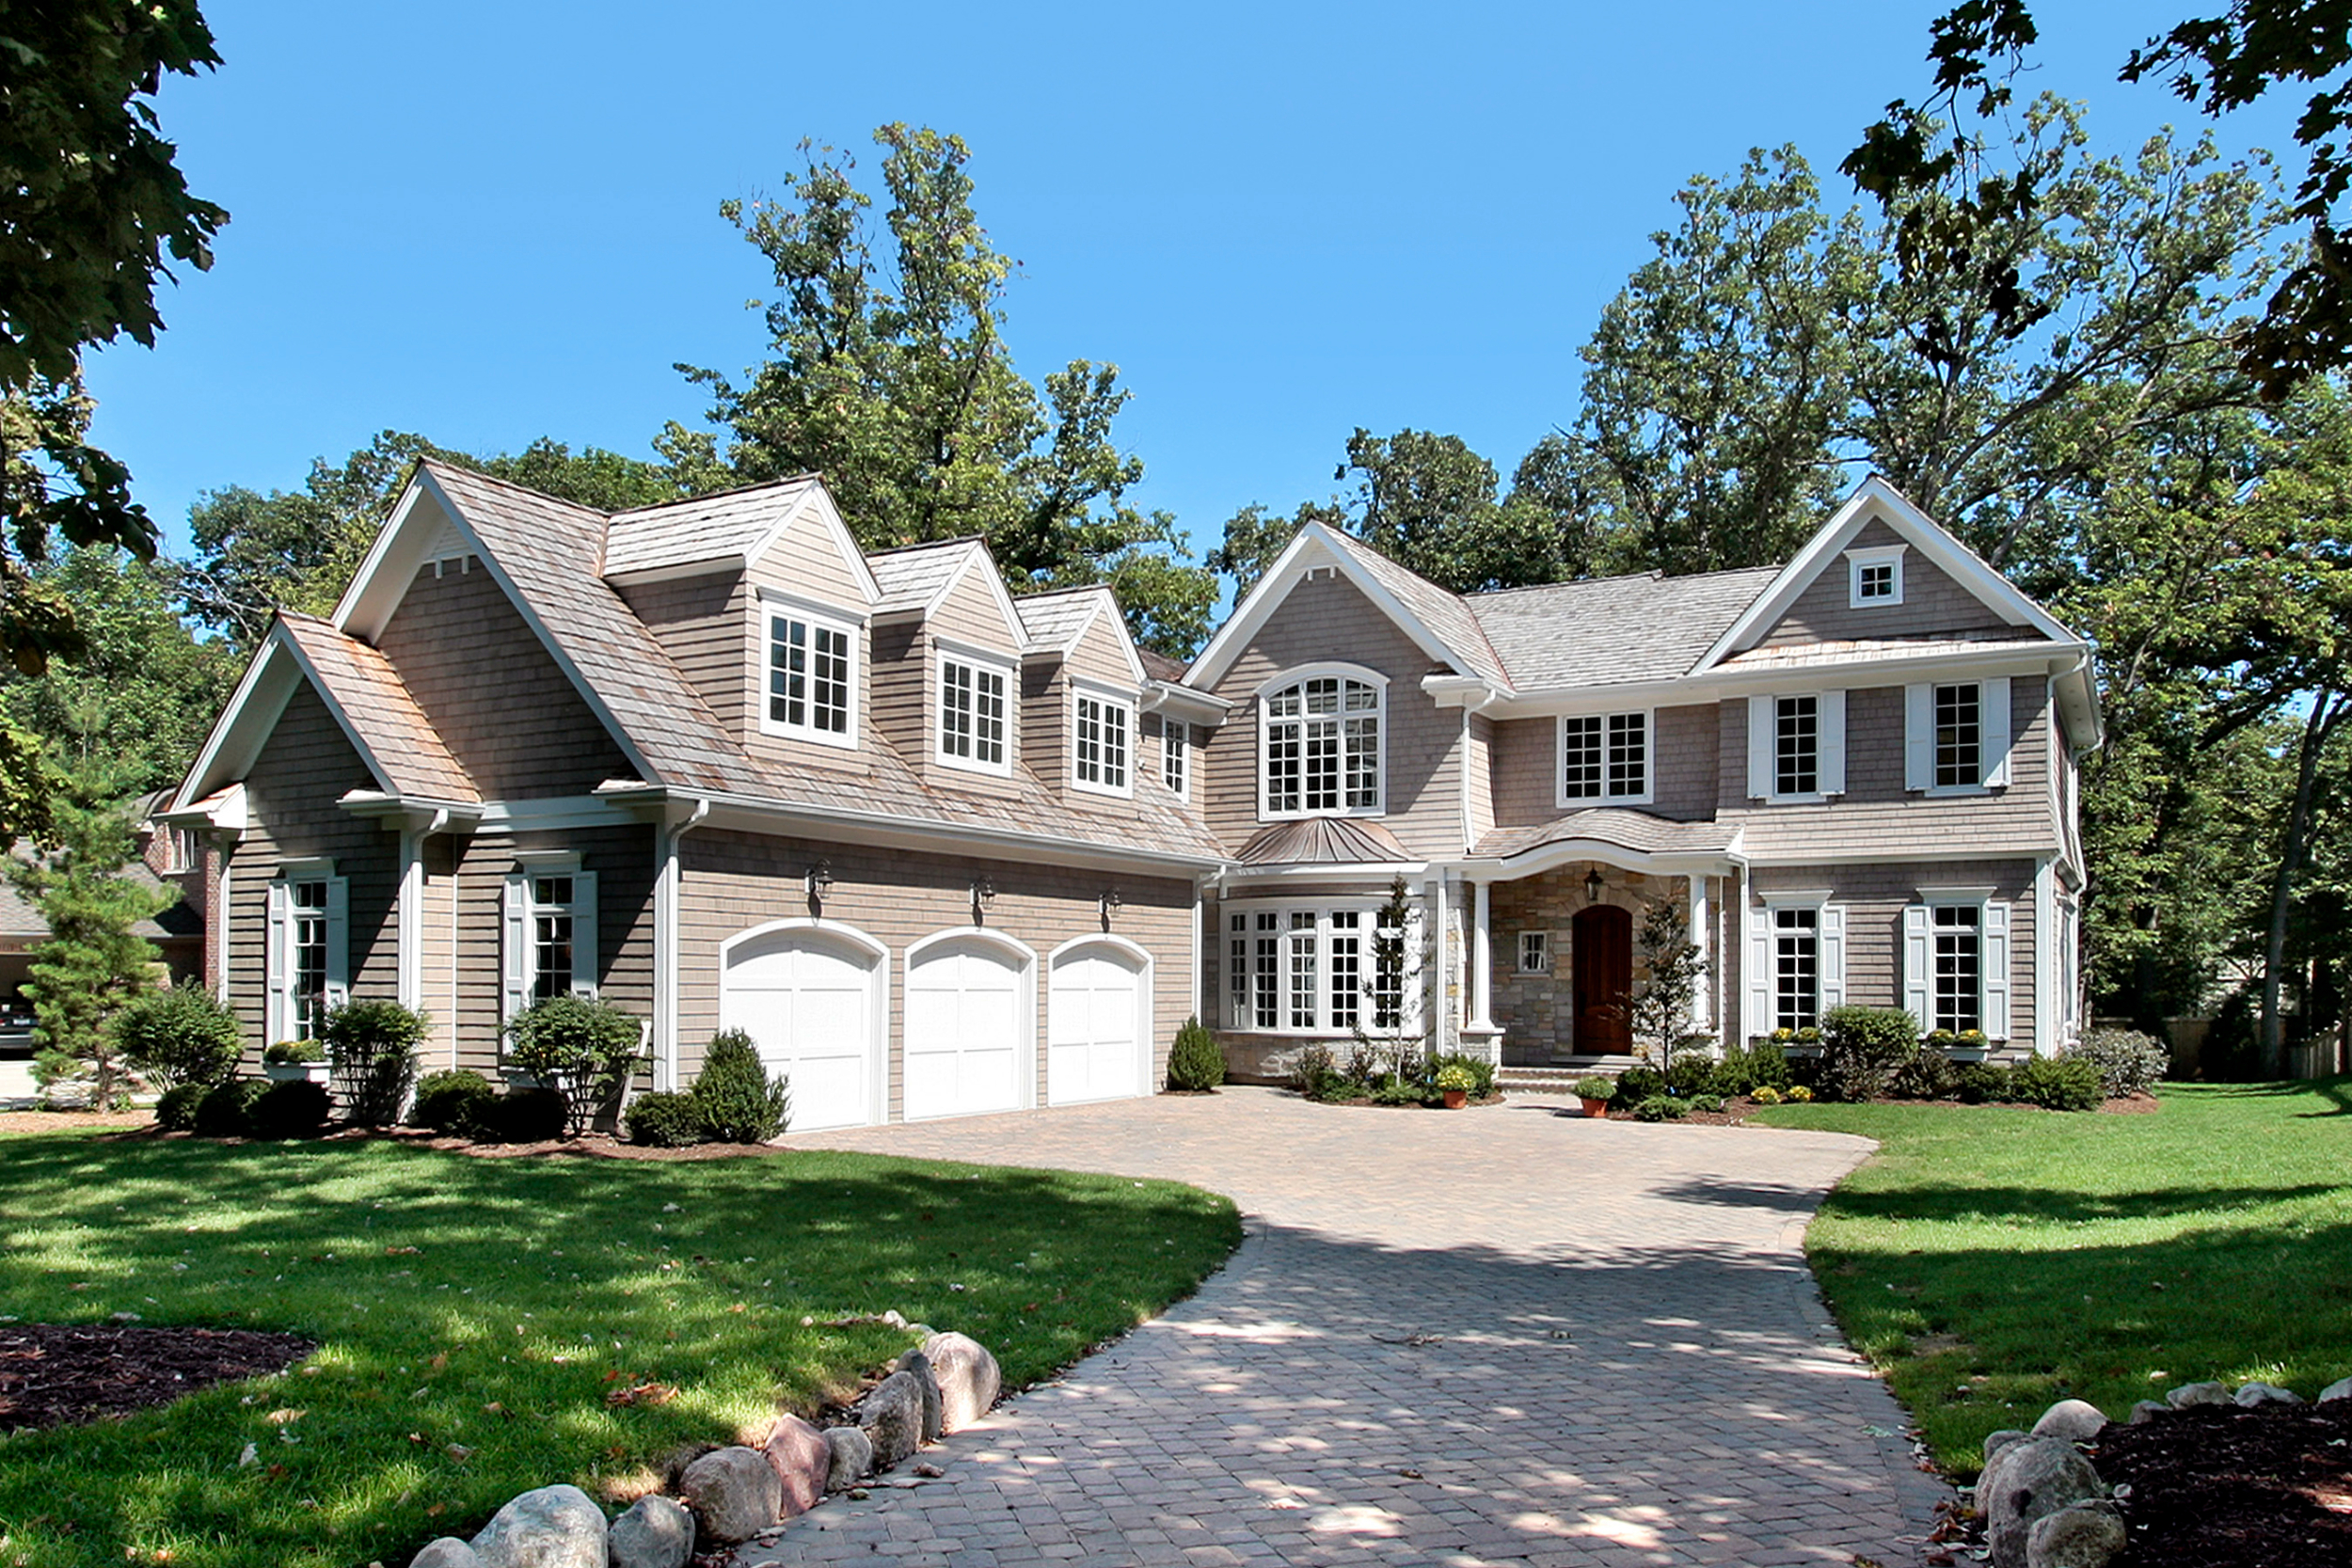 A large luxury home in a residential neighborhood